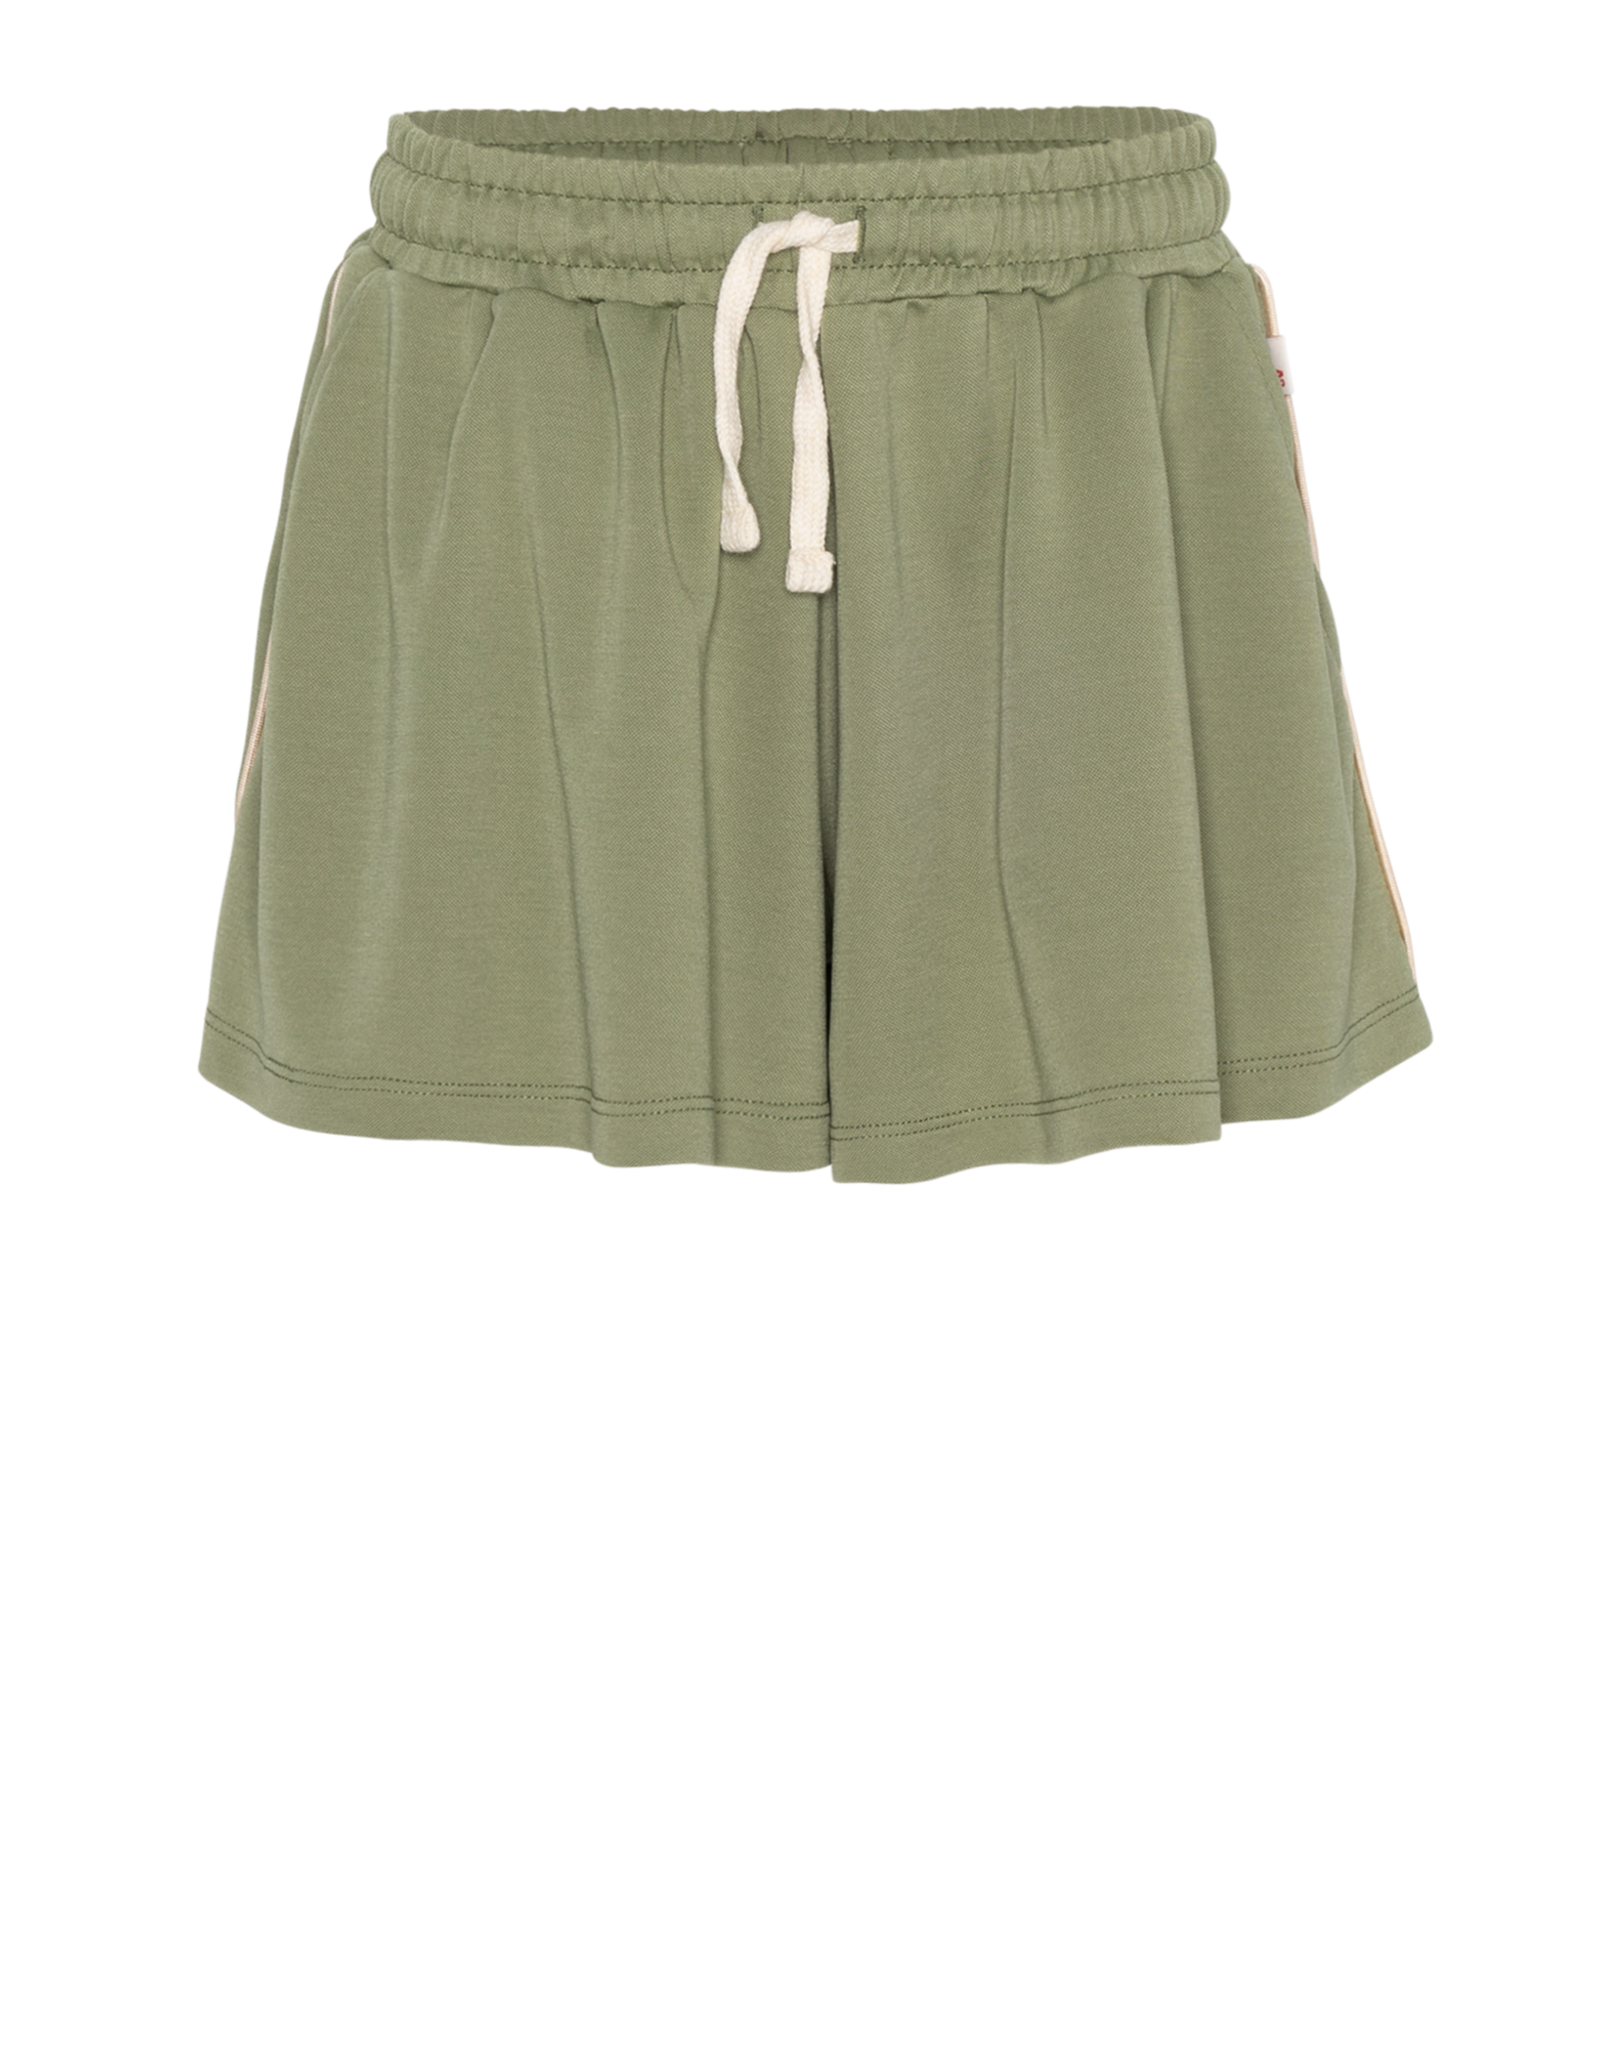 AMERICAN OUTFITTERS Ao76 Rita shorts olive